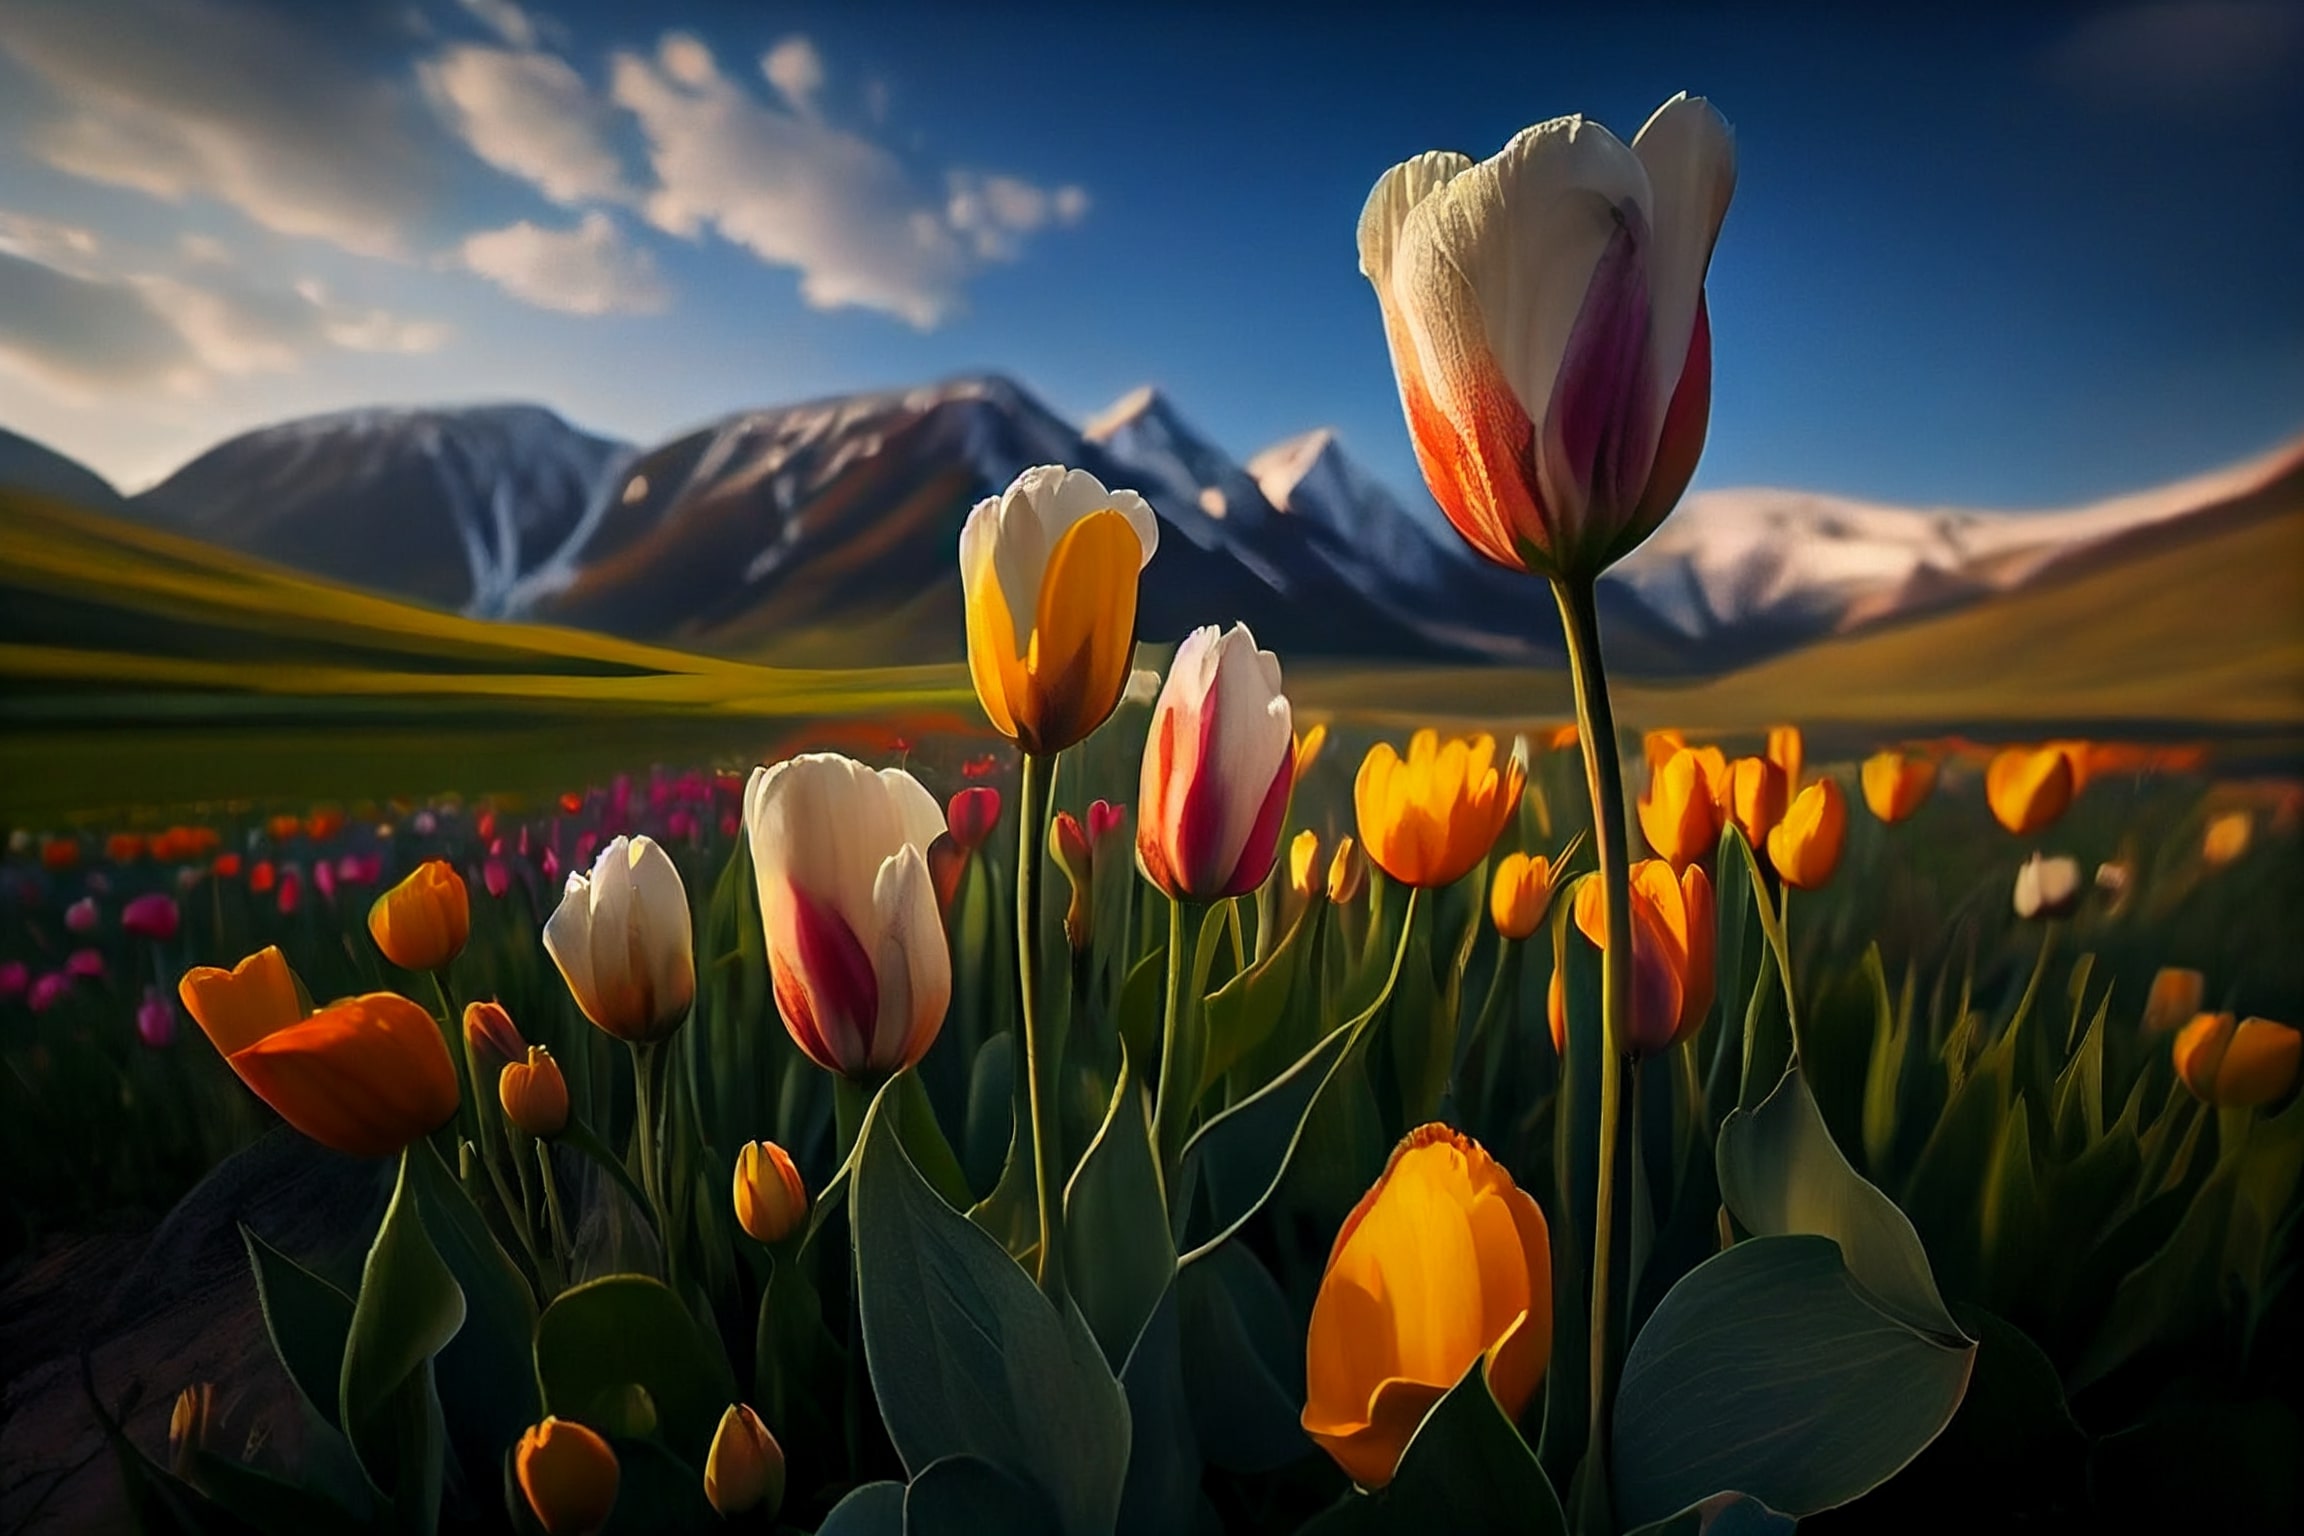 Painting of a field of flowers with mountains in the background.